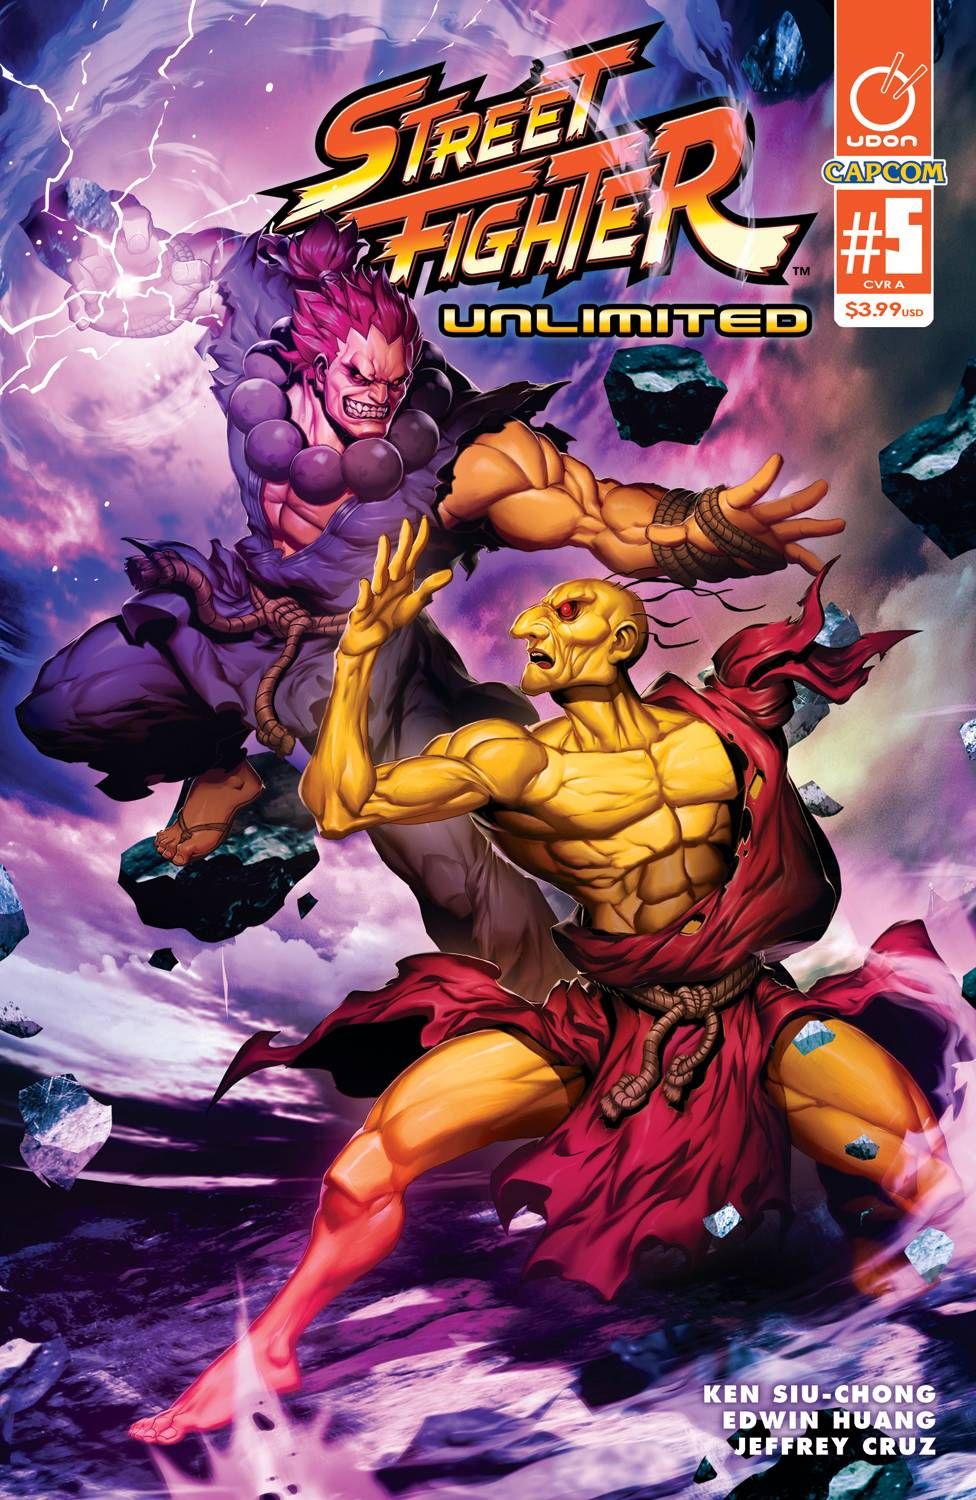 Street Fighter Unlimited #5 Comic